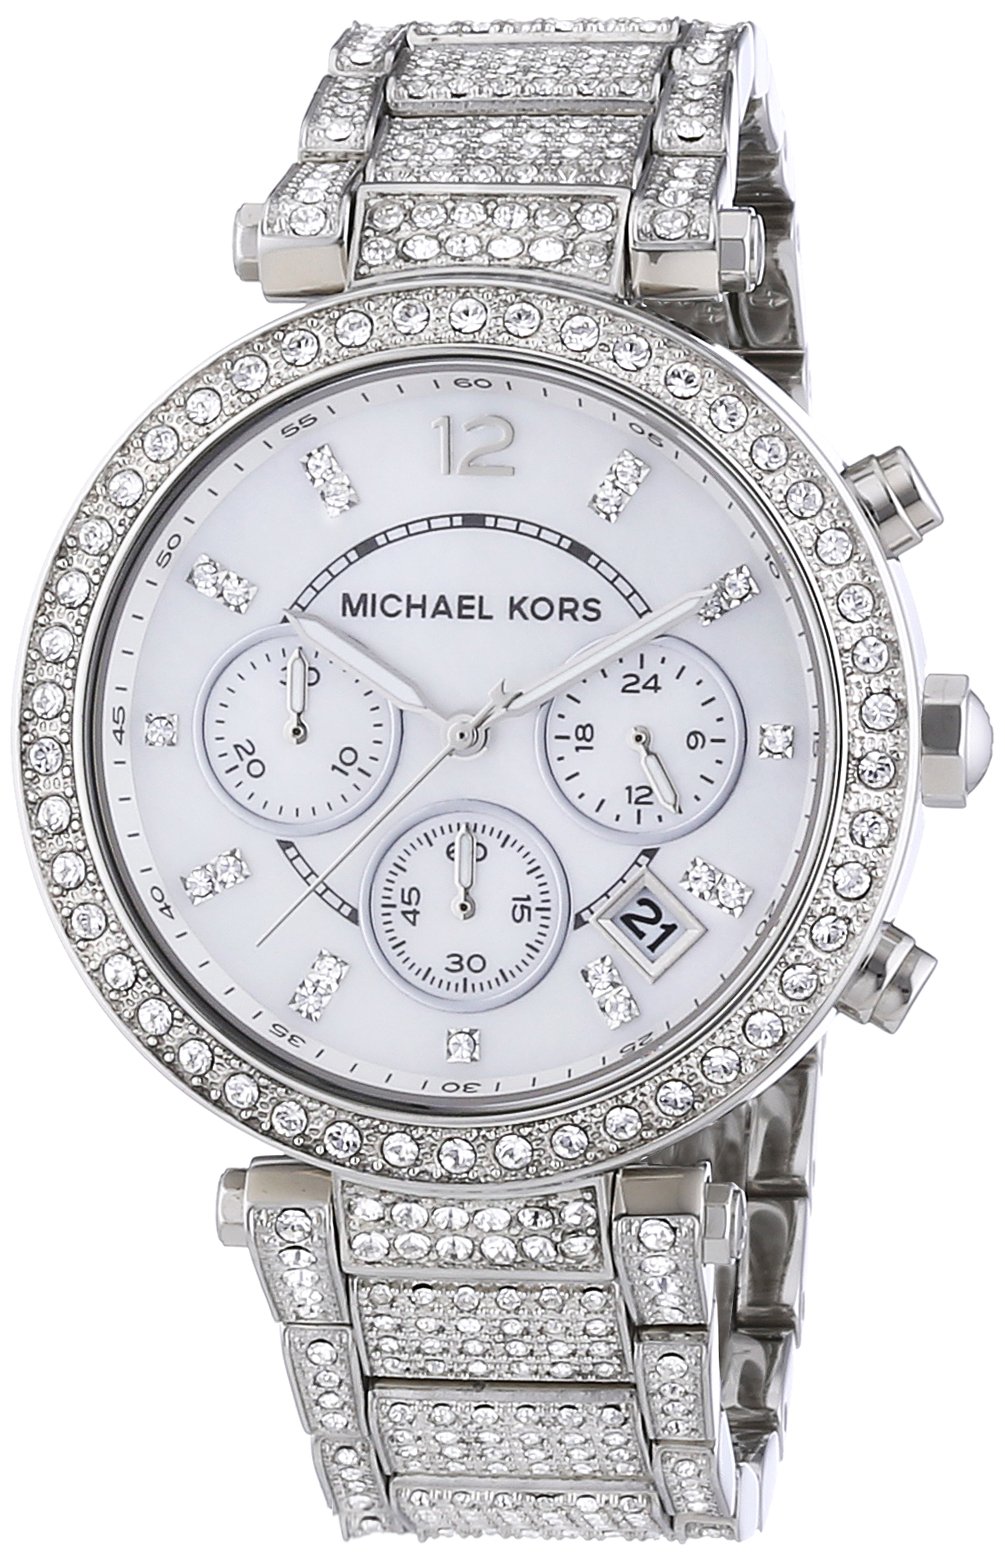 Michael Kors Watch Silver and Pink with Diamonds  eBay